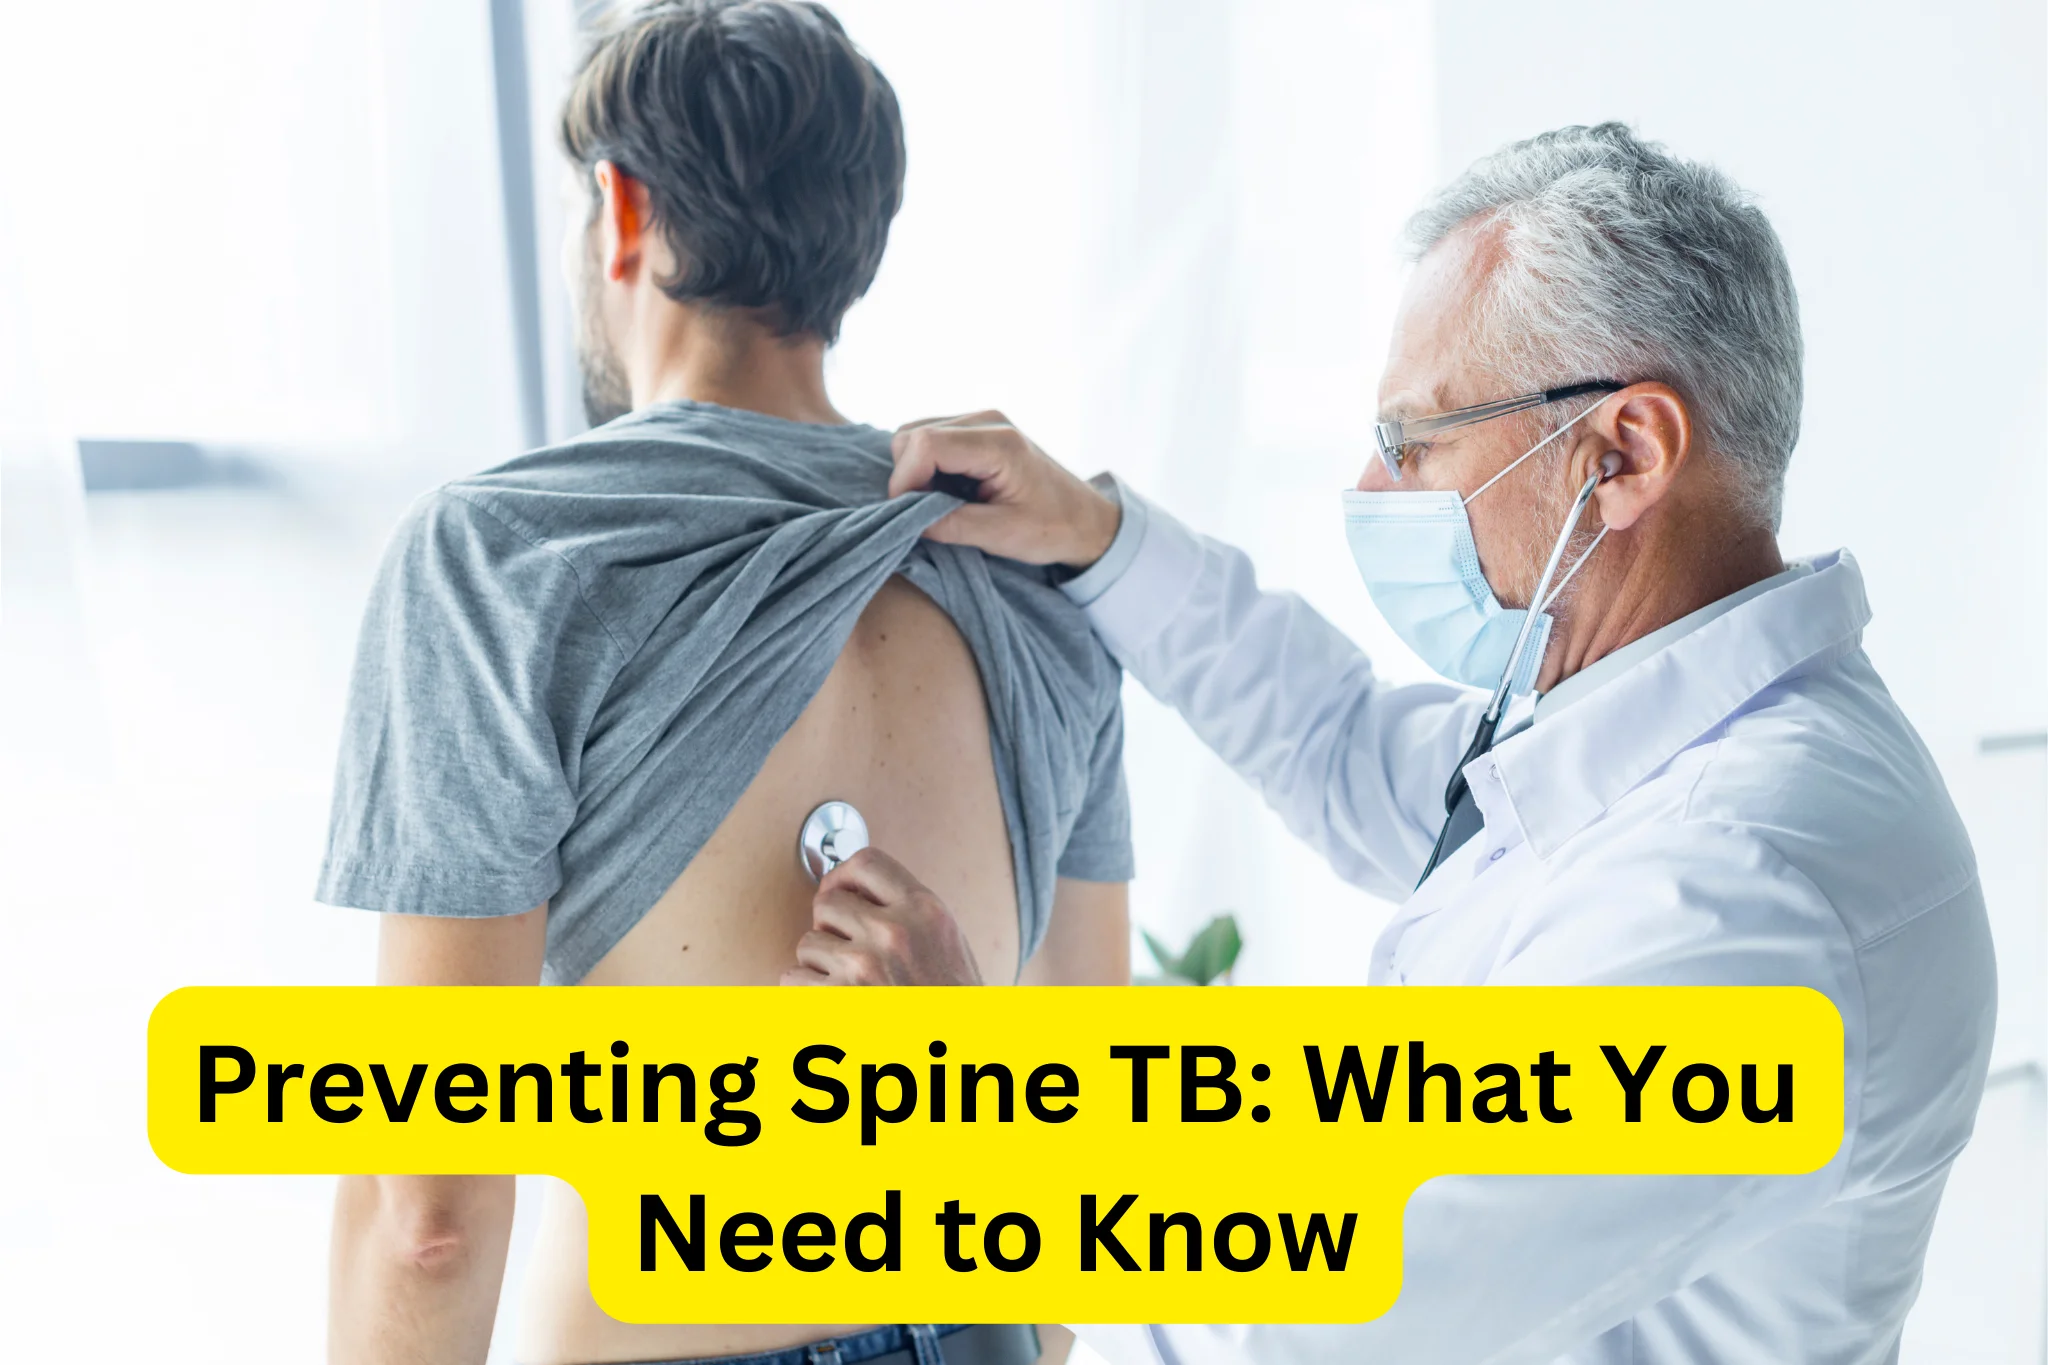 Preventing Spine Tuberculosis (TB): What You Need to Know